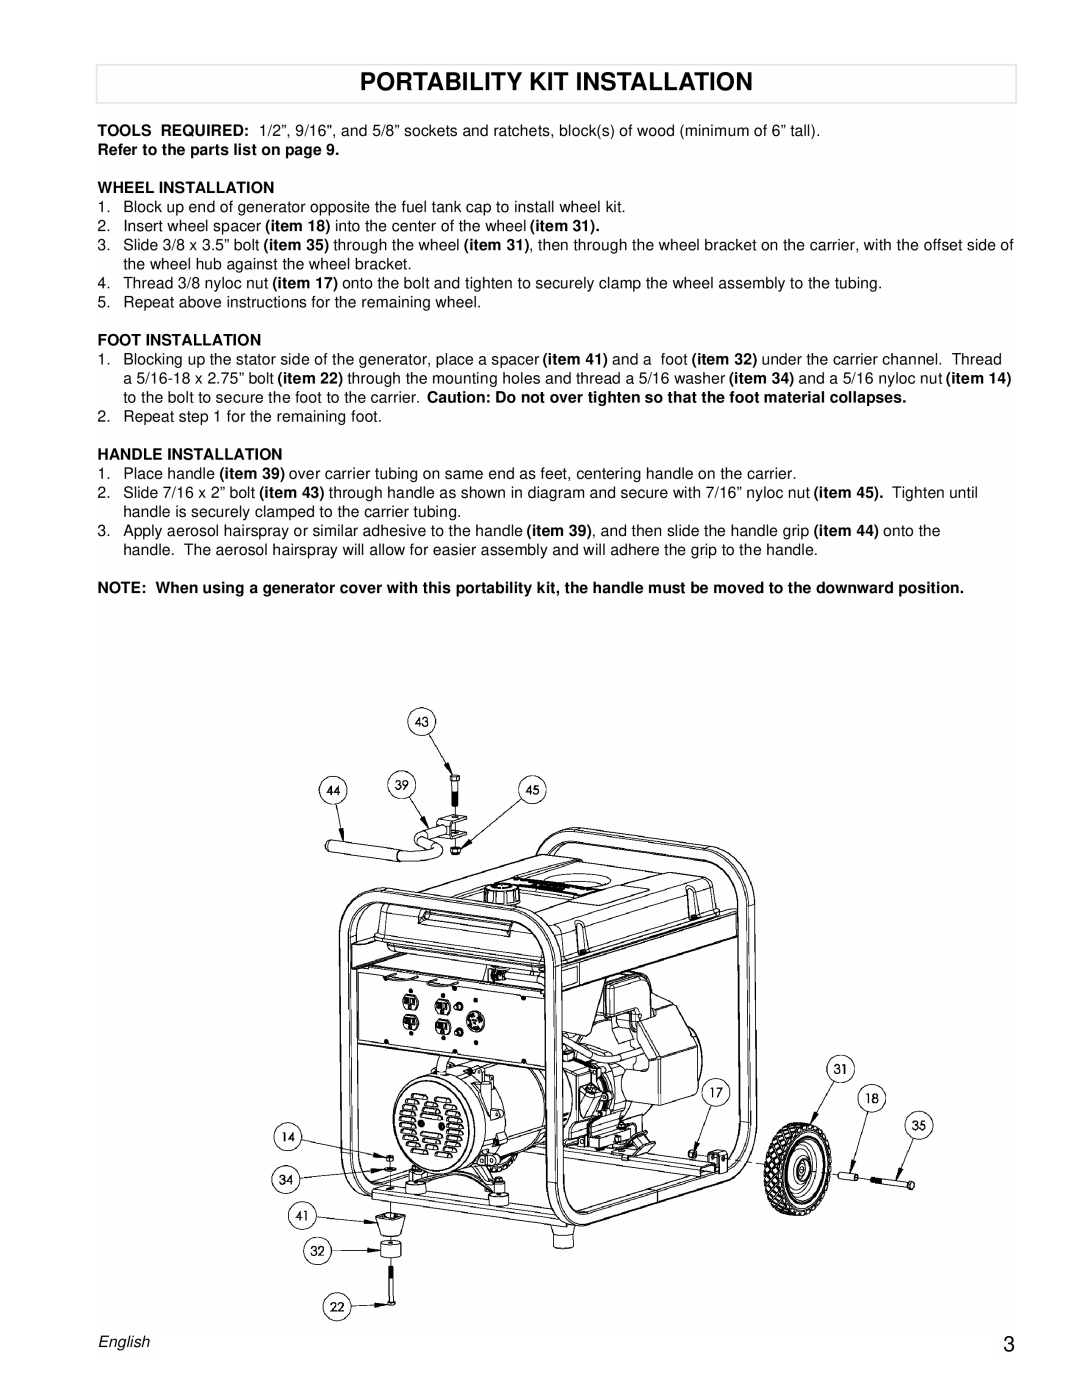 Powermate PM0525312.03 manual Portability Kit Installation, Refer to the parts list on page, Wheel Installation, English 